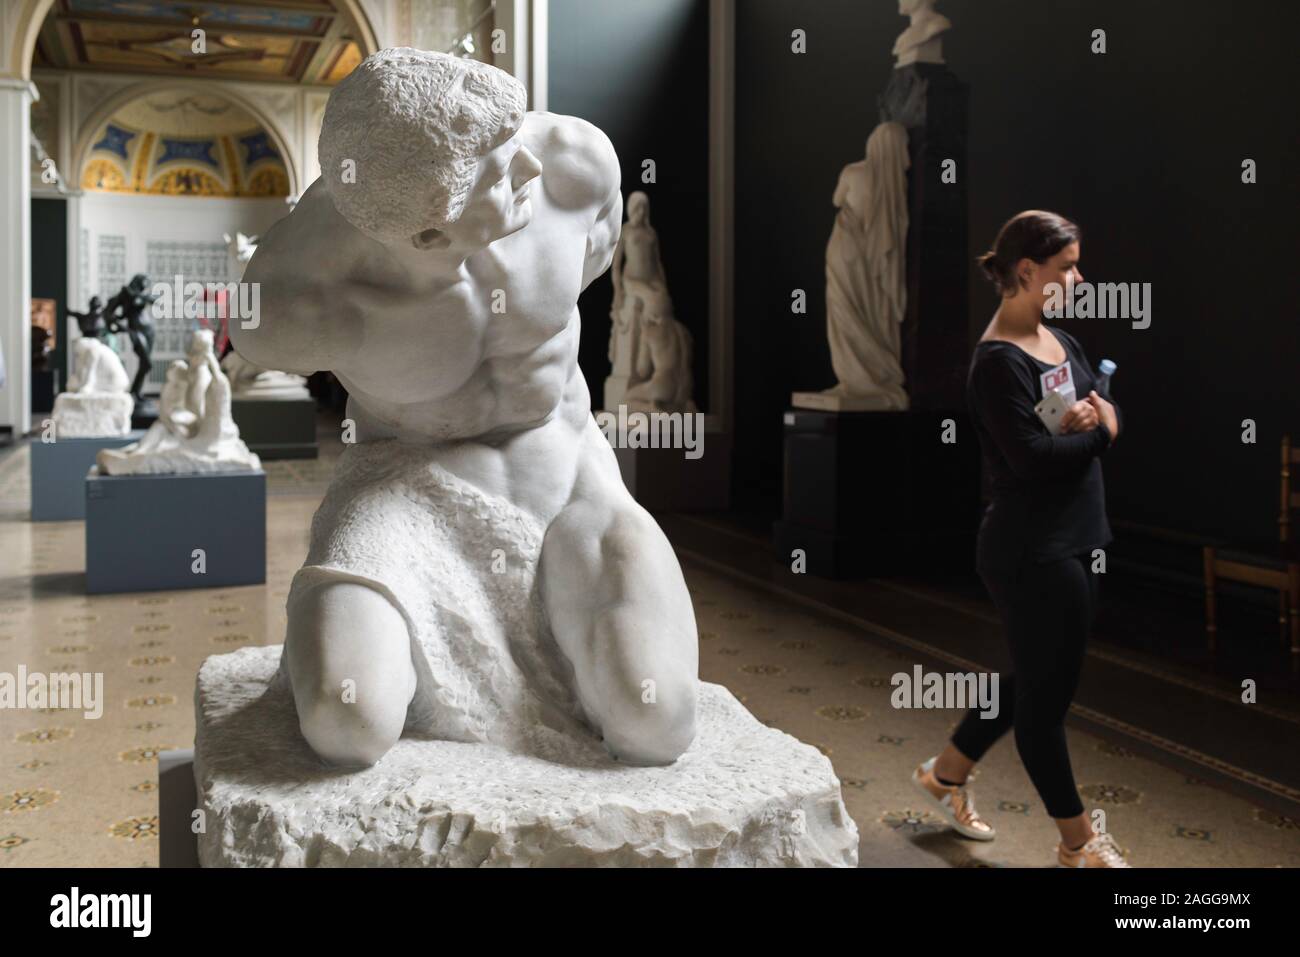 View of sculpture titled The Slave (Stephan Sinding 1913) and a young woman visiting the Ny Carlsberg Glyptotek museum in Copenhagen, Denmark. Stock Photo